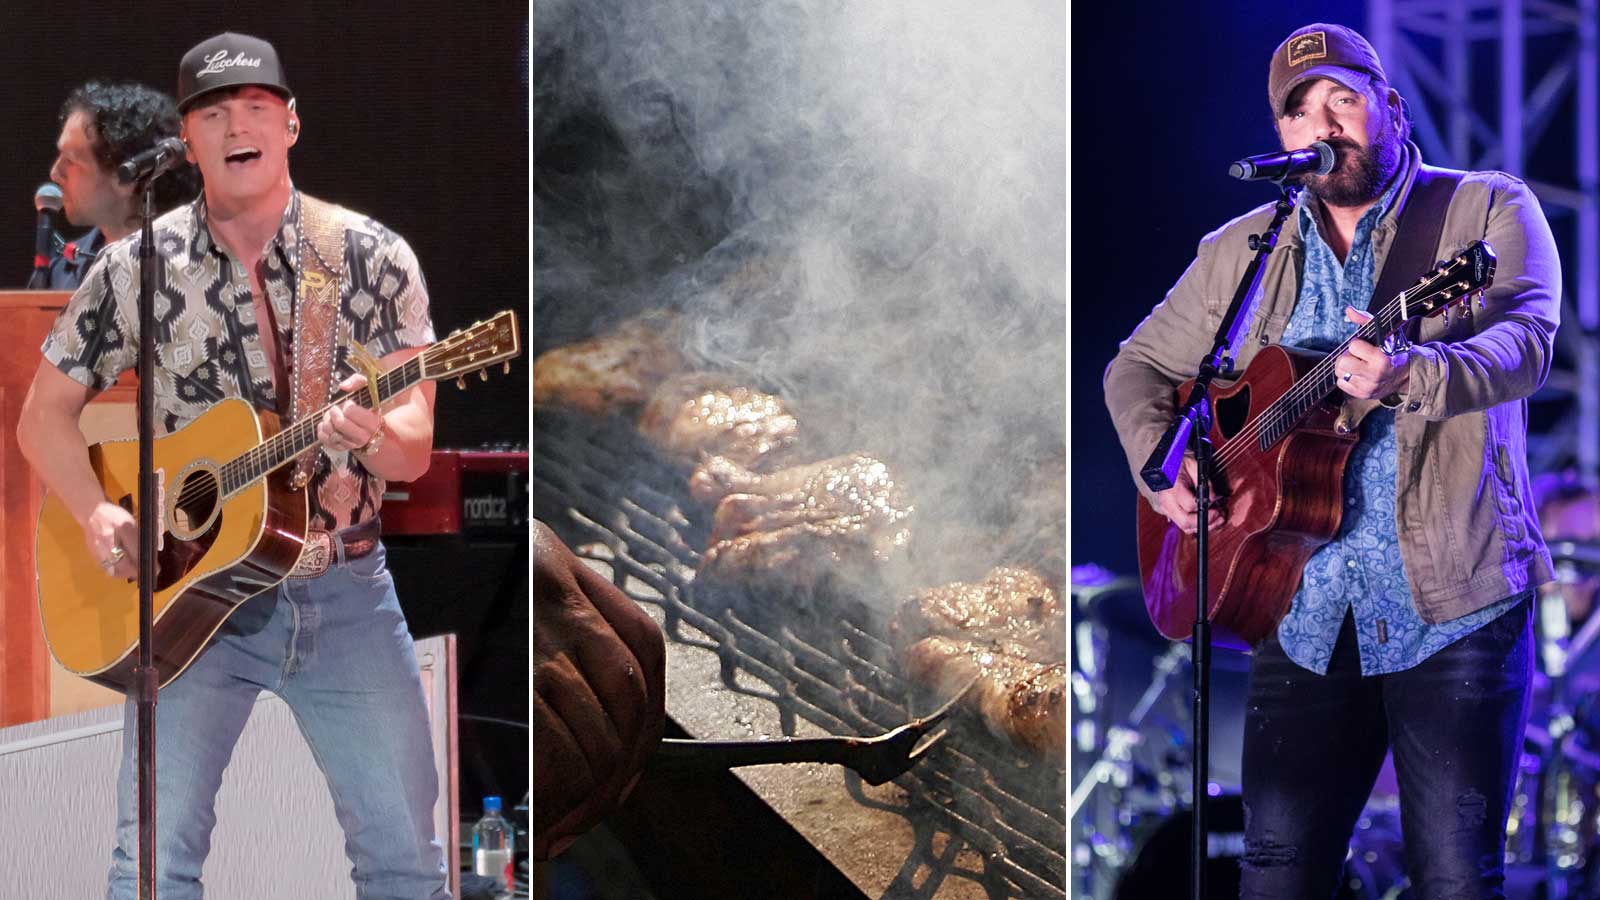 Three panel image showing Parker McCollum on the left and Rodney Atkins on the right, both playing ...